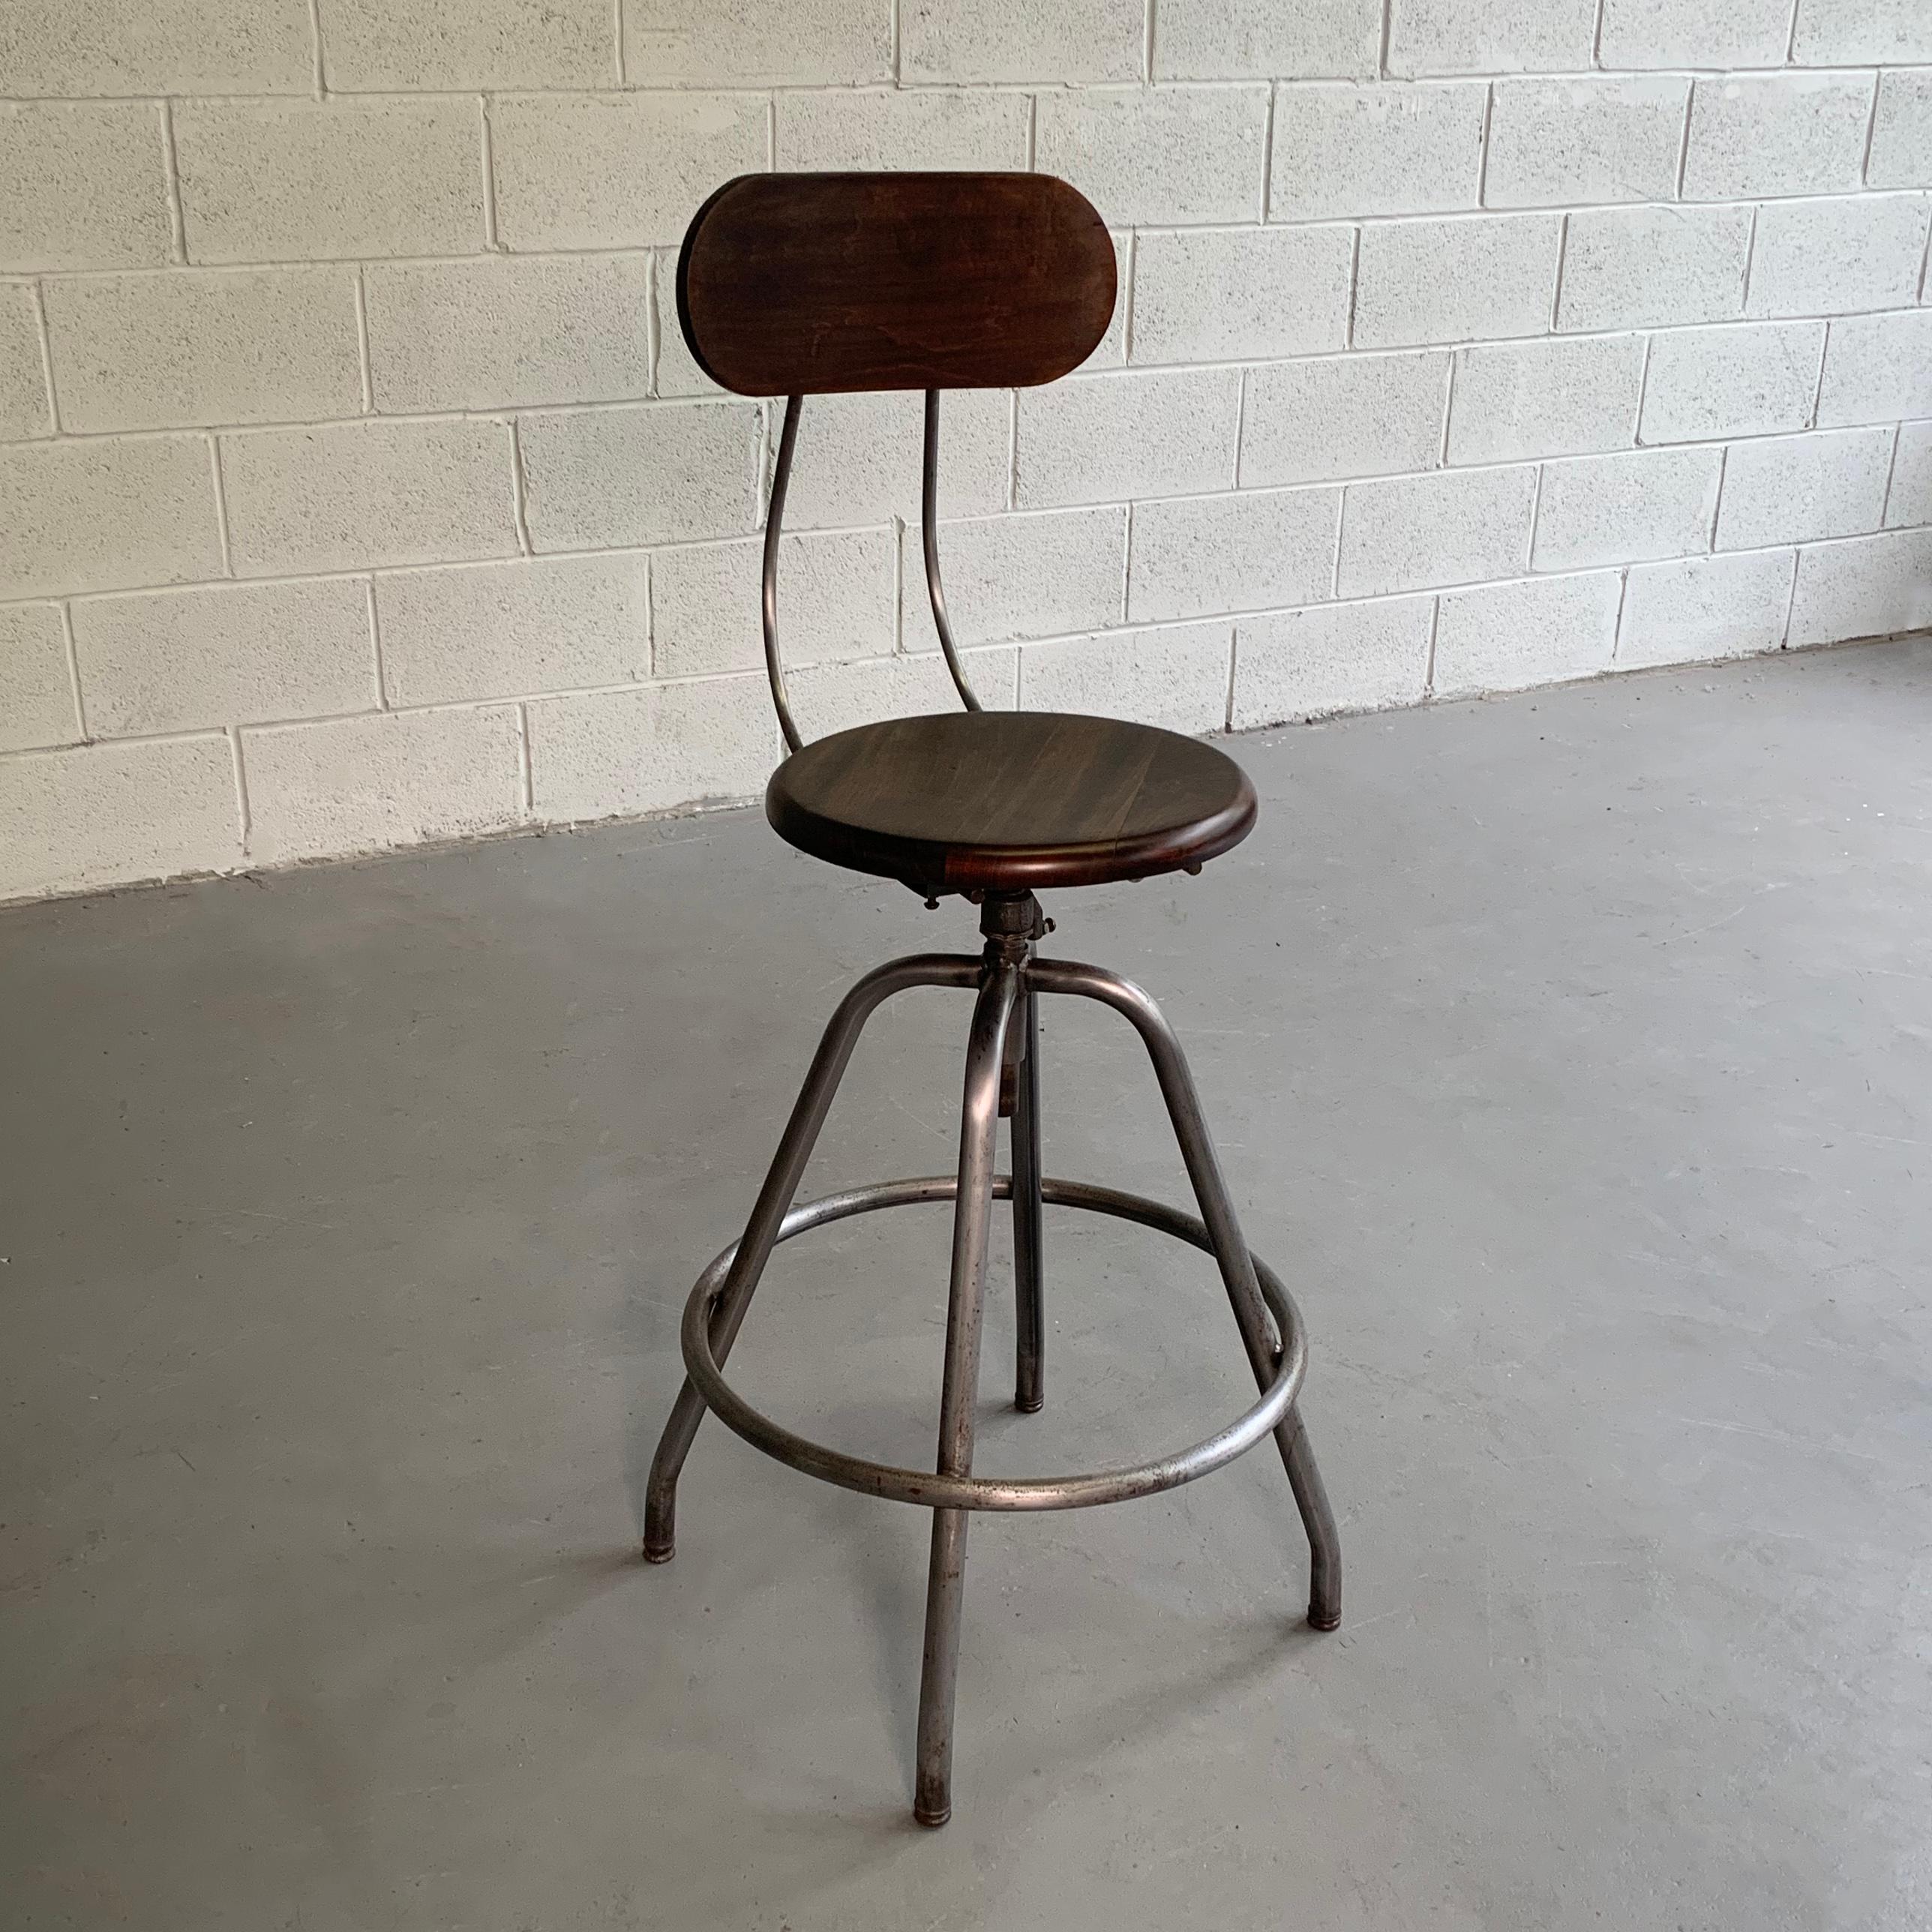 Industrial, drafting stool features a brushed steel frame with a maple back and 14 inch round, swivel seat that is height adjustable from 27.5 - 31 inches.